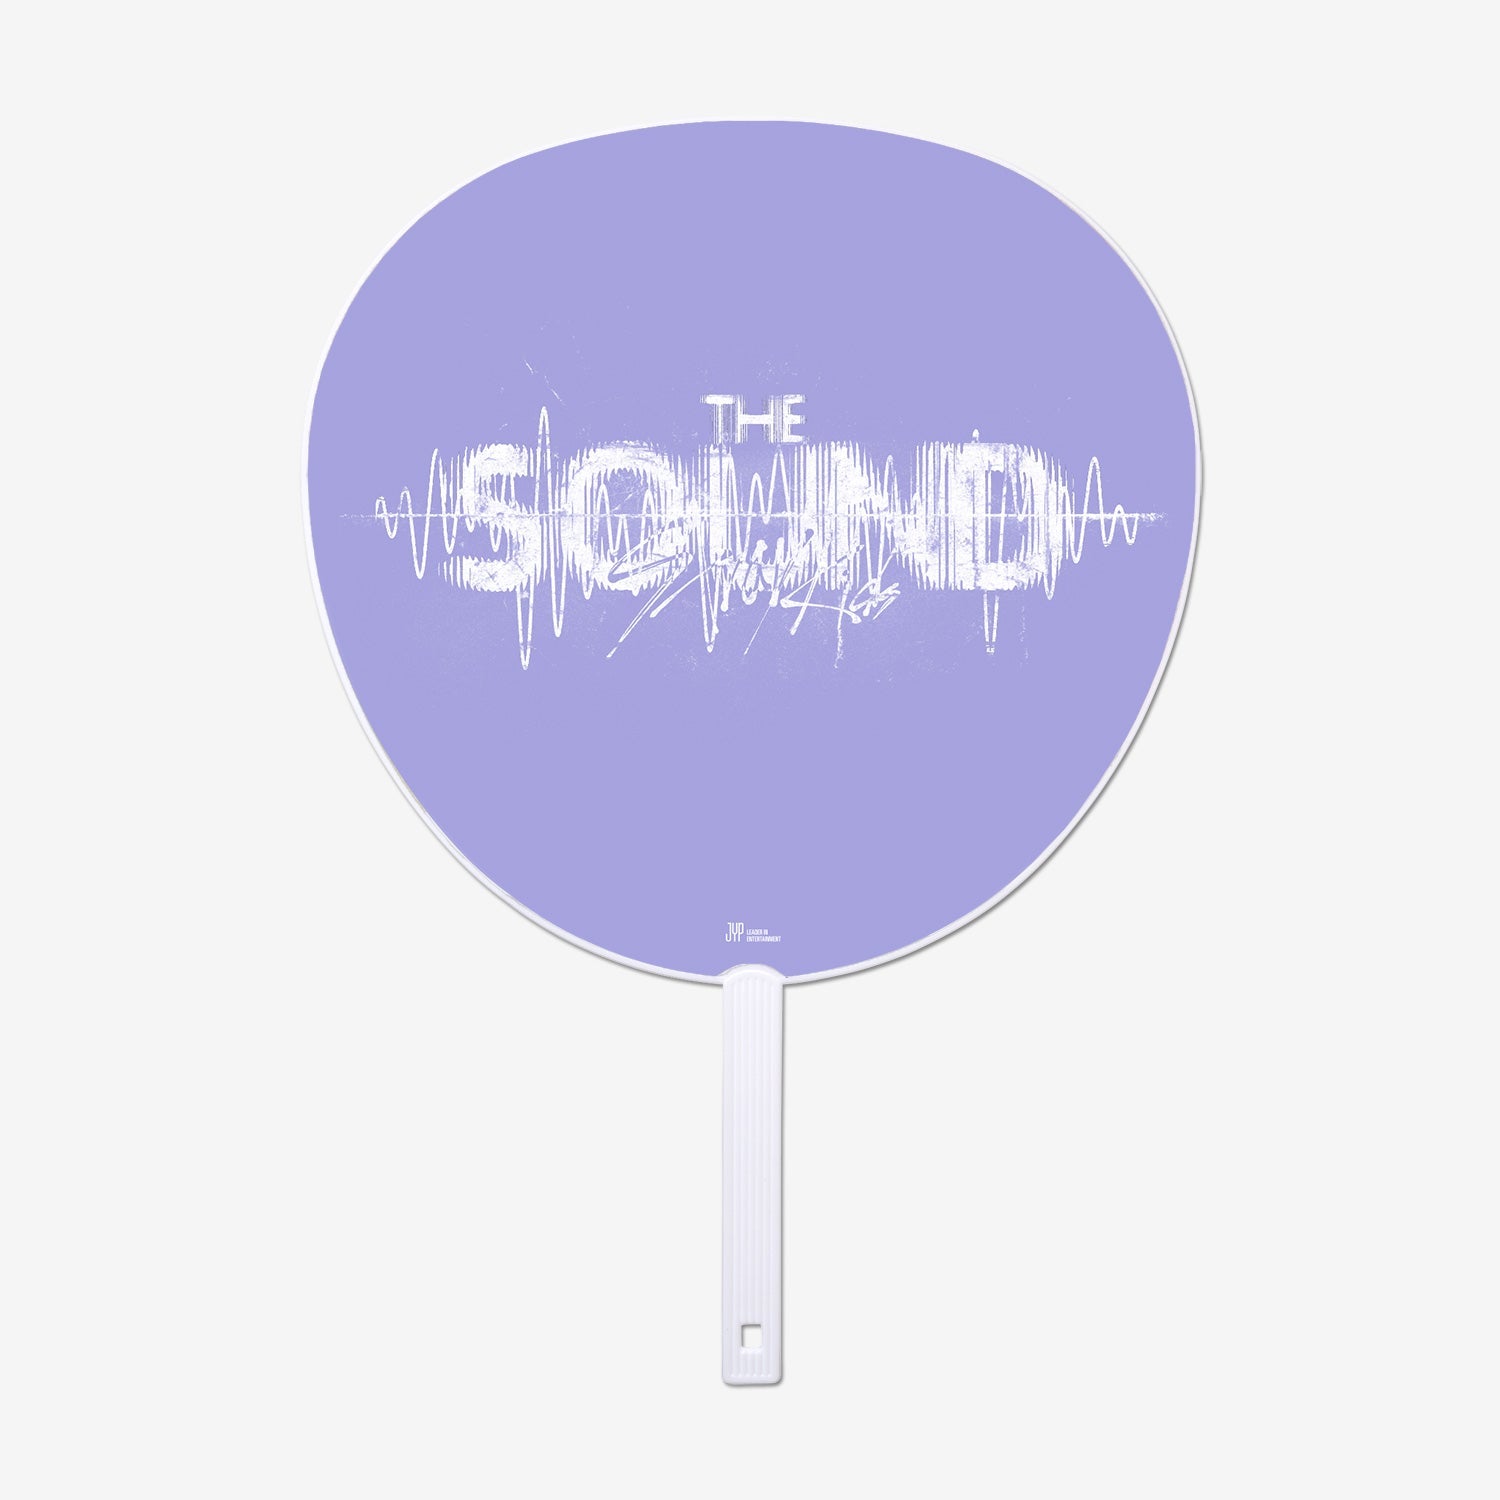 IMAGE PICKET - Changbin / Stray Kids『THE SOUND』